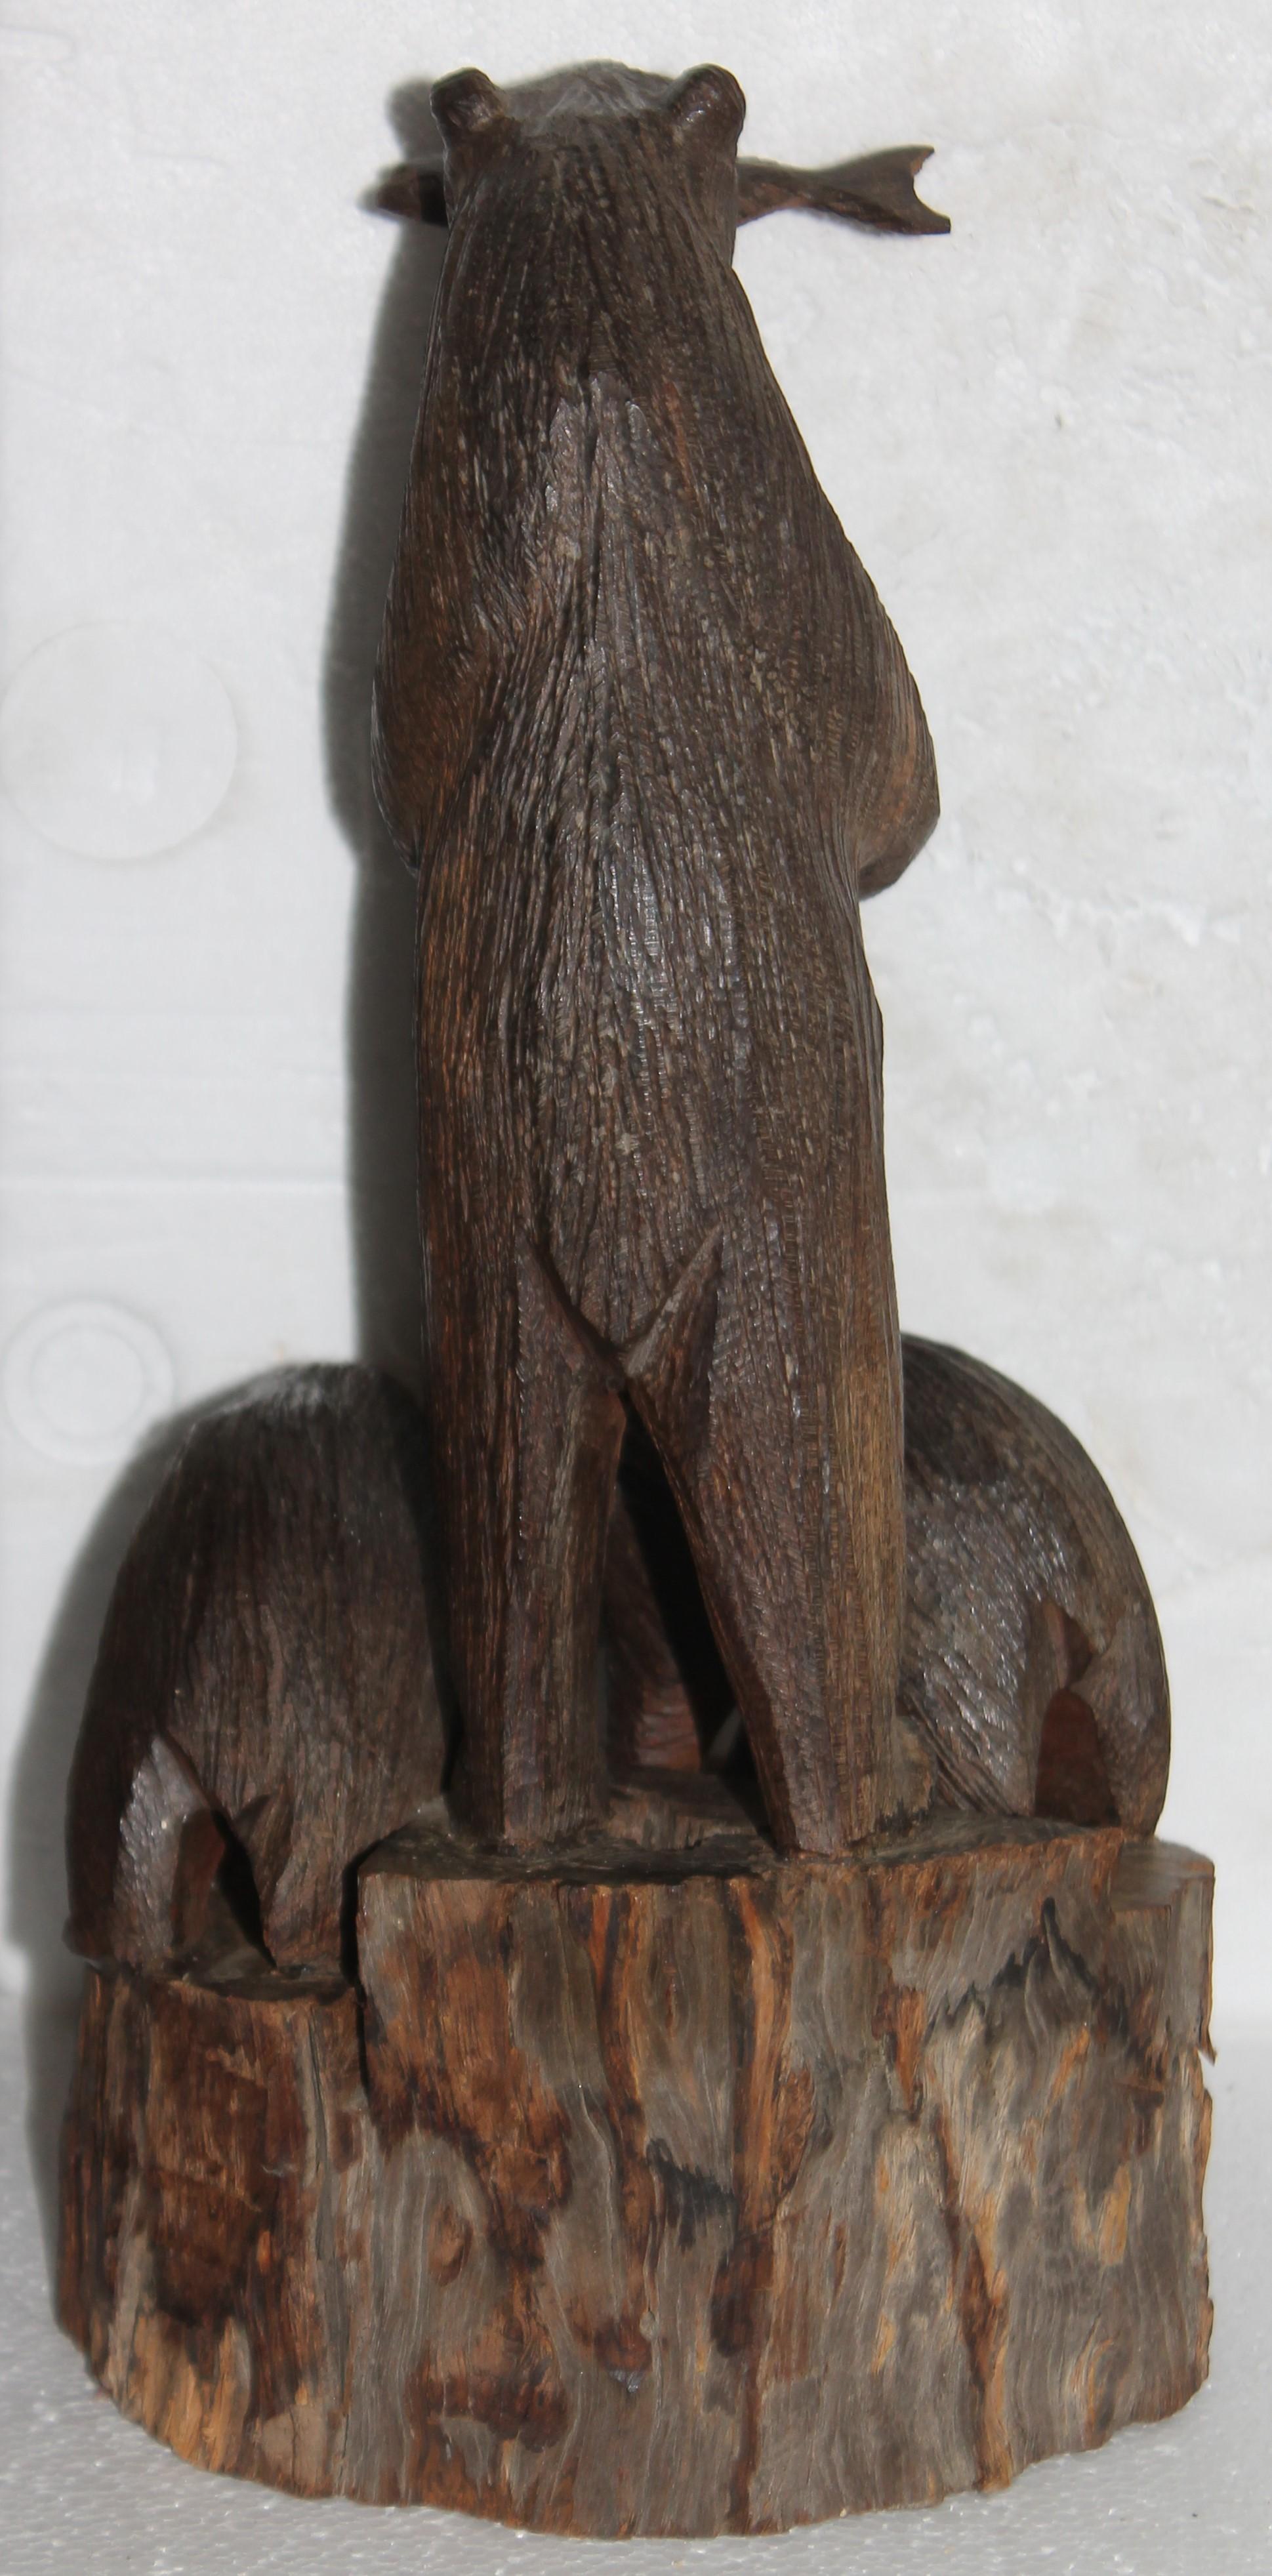 Hand-Crafted Hand Carved Sculpture of Bears For Sale